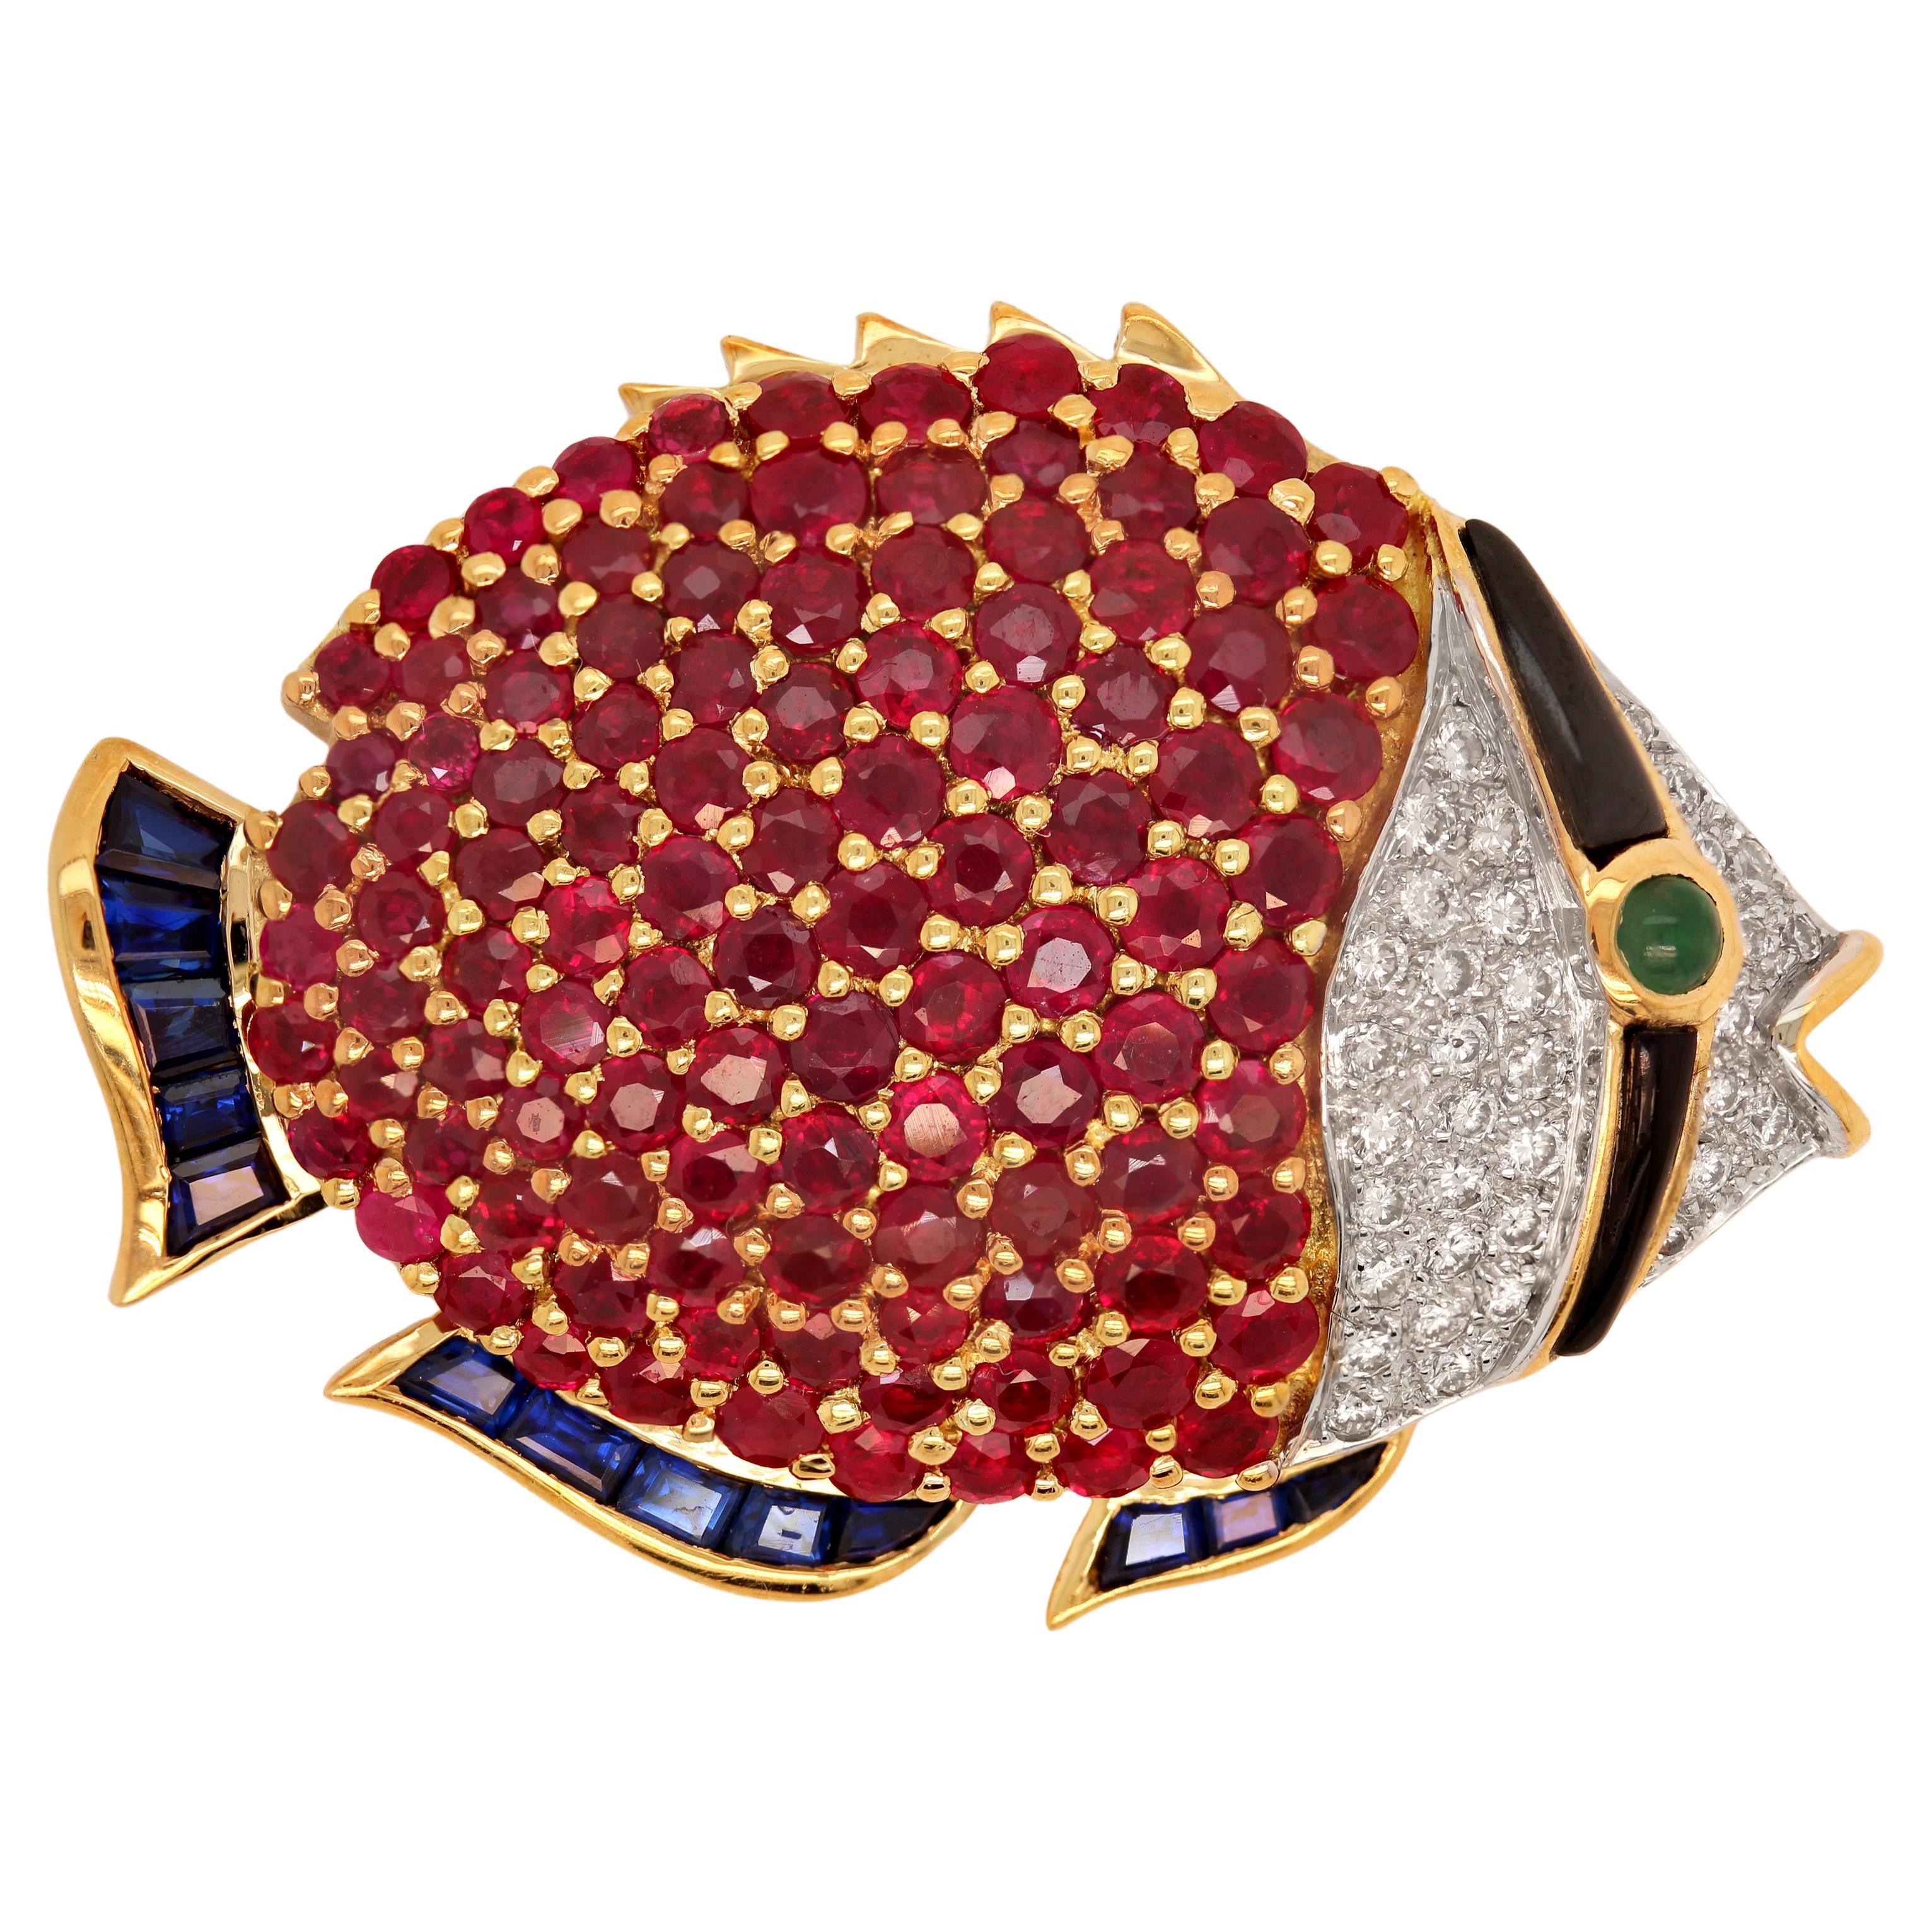 18K Gold Pigeon Blood Ruby Diamonds Emerald Blue Sapphires Large Fish Brooch Pin For Sale